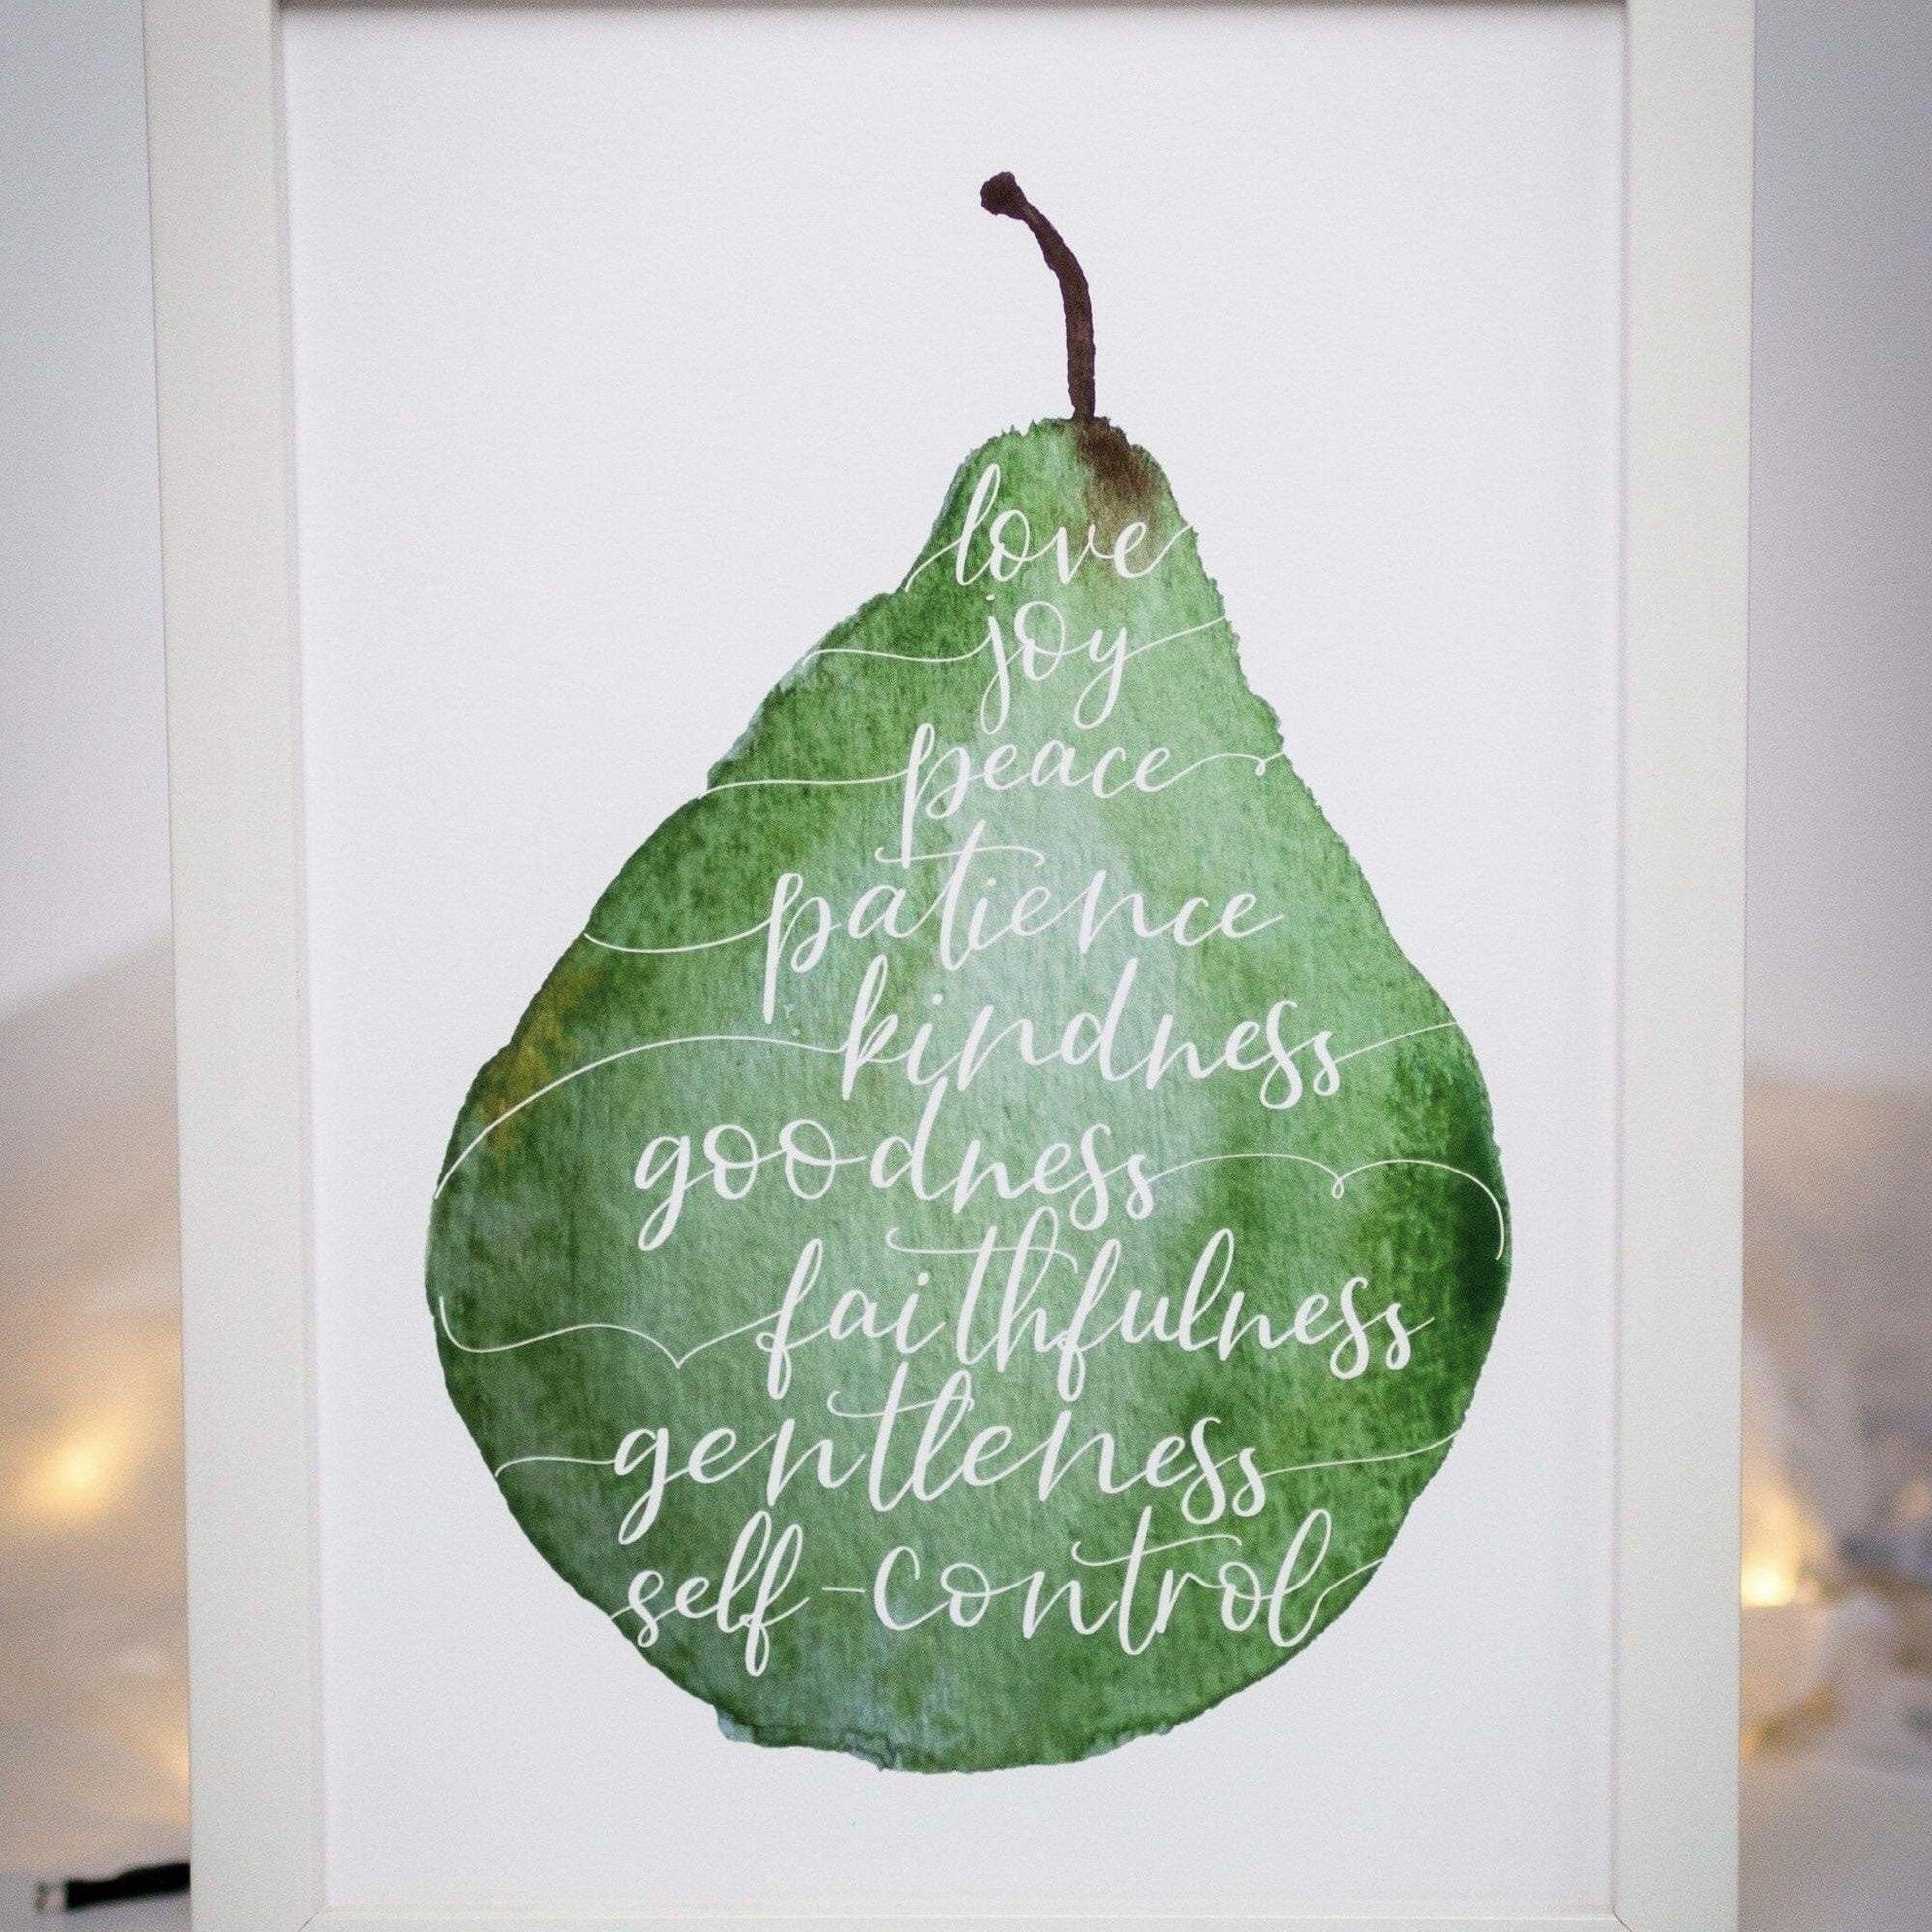 A4 print of Christian fruit of the spirit from the Bible verse Galatians 5:22-23